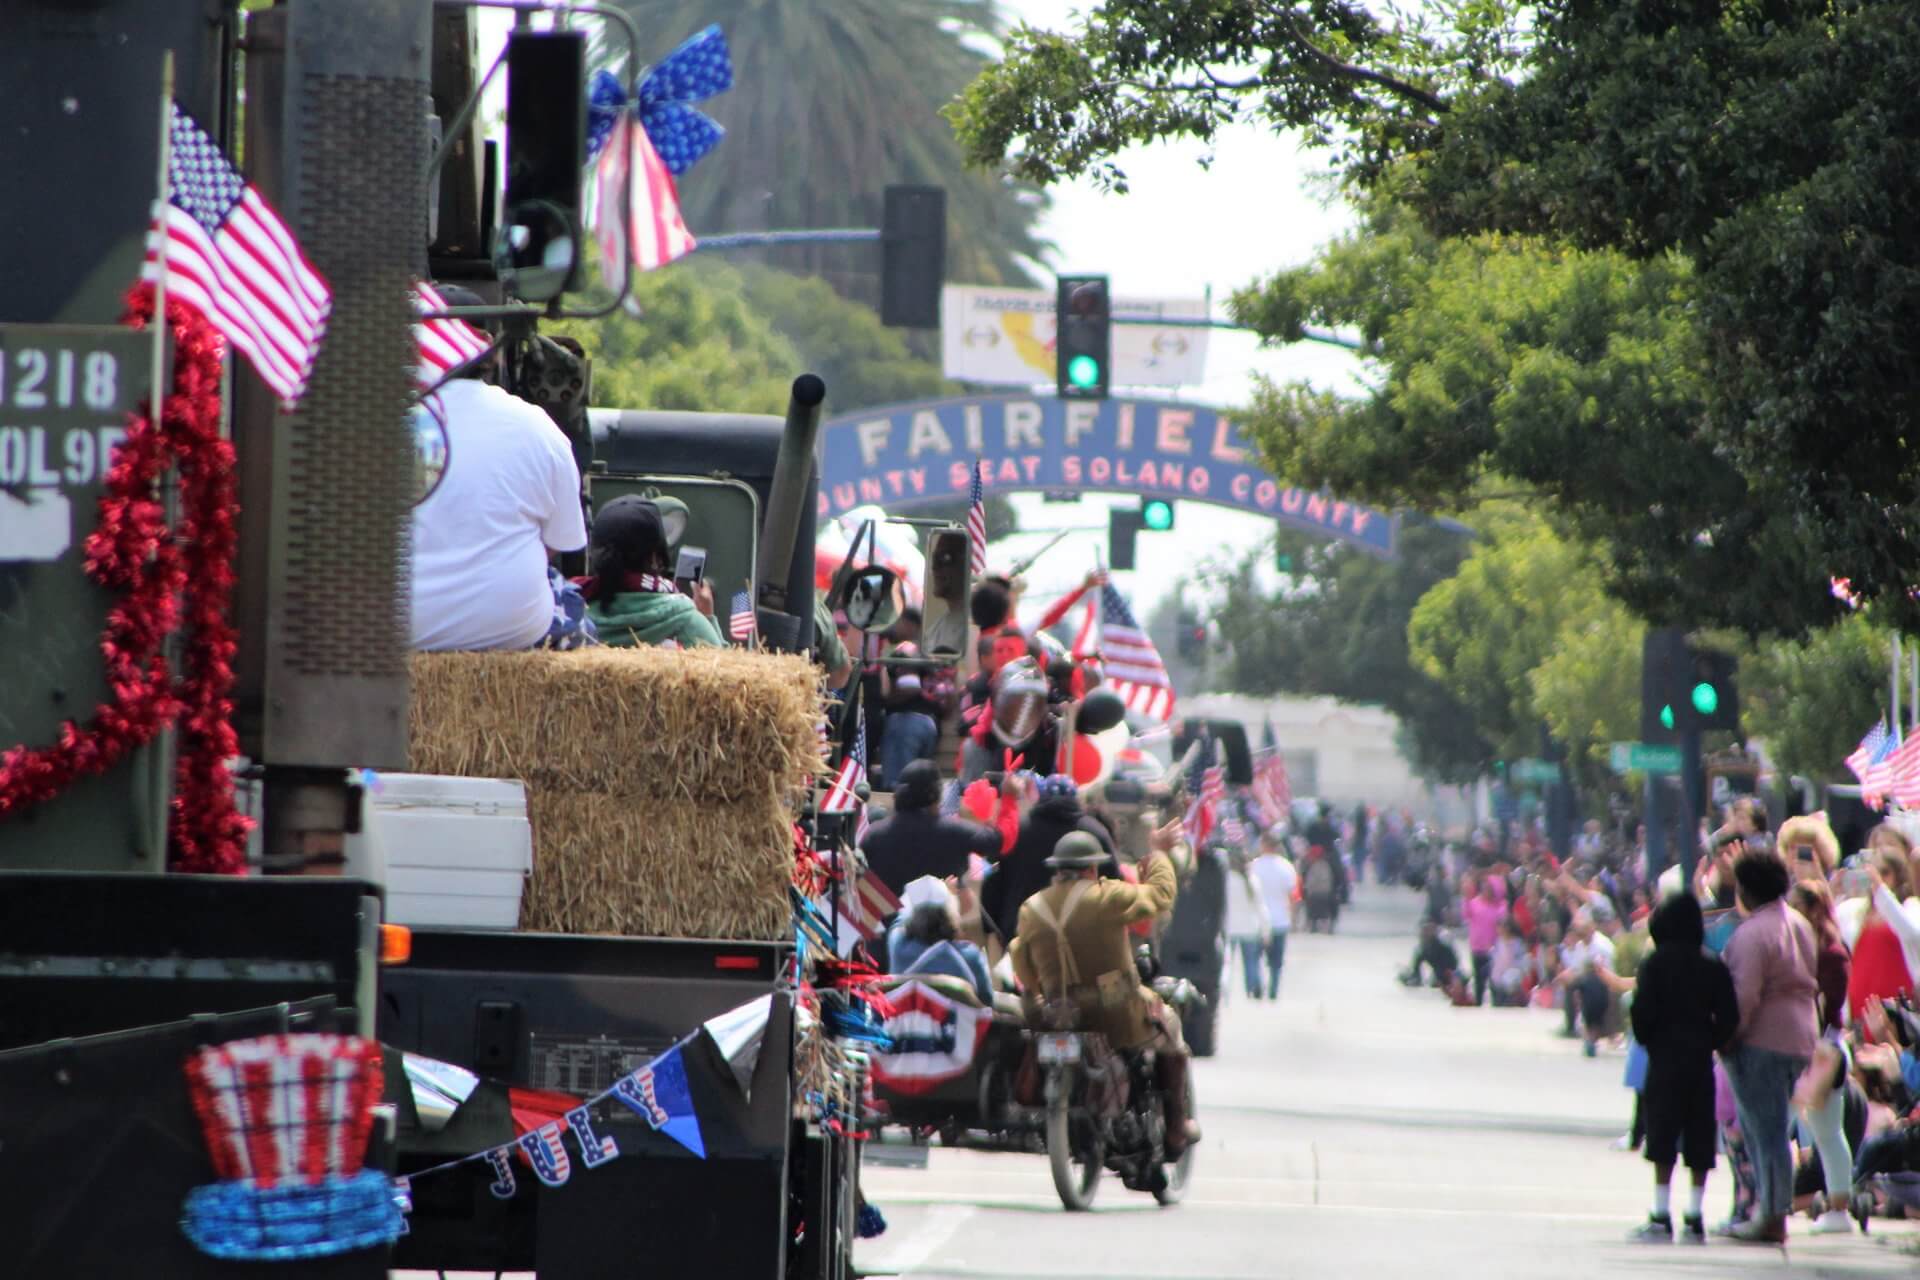 Downtown plans 2019 Fairfield Independence Day Parade